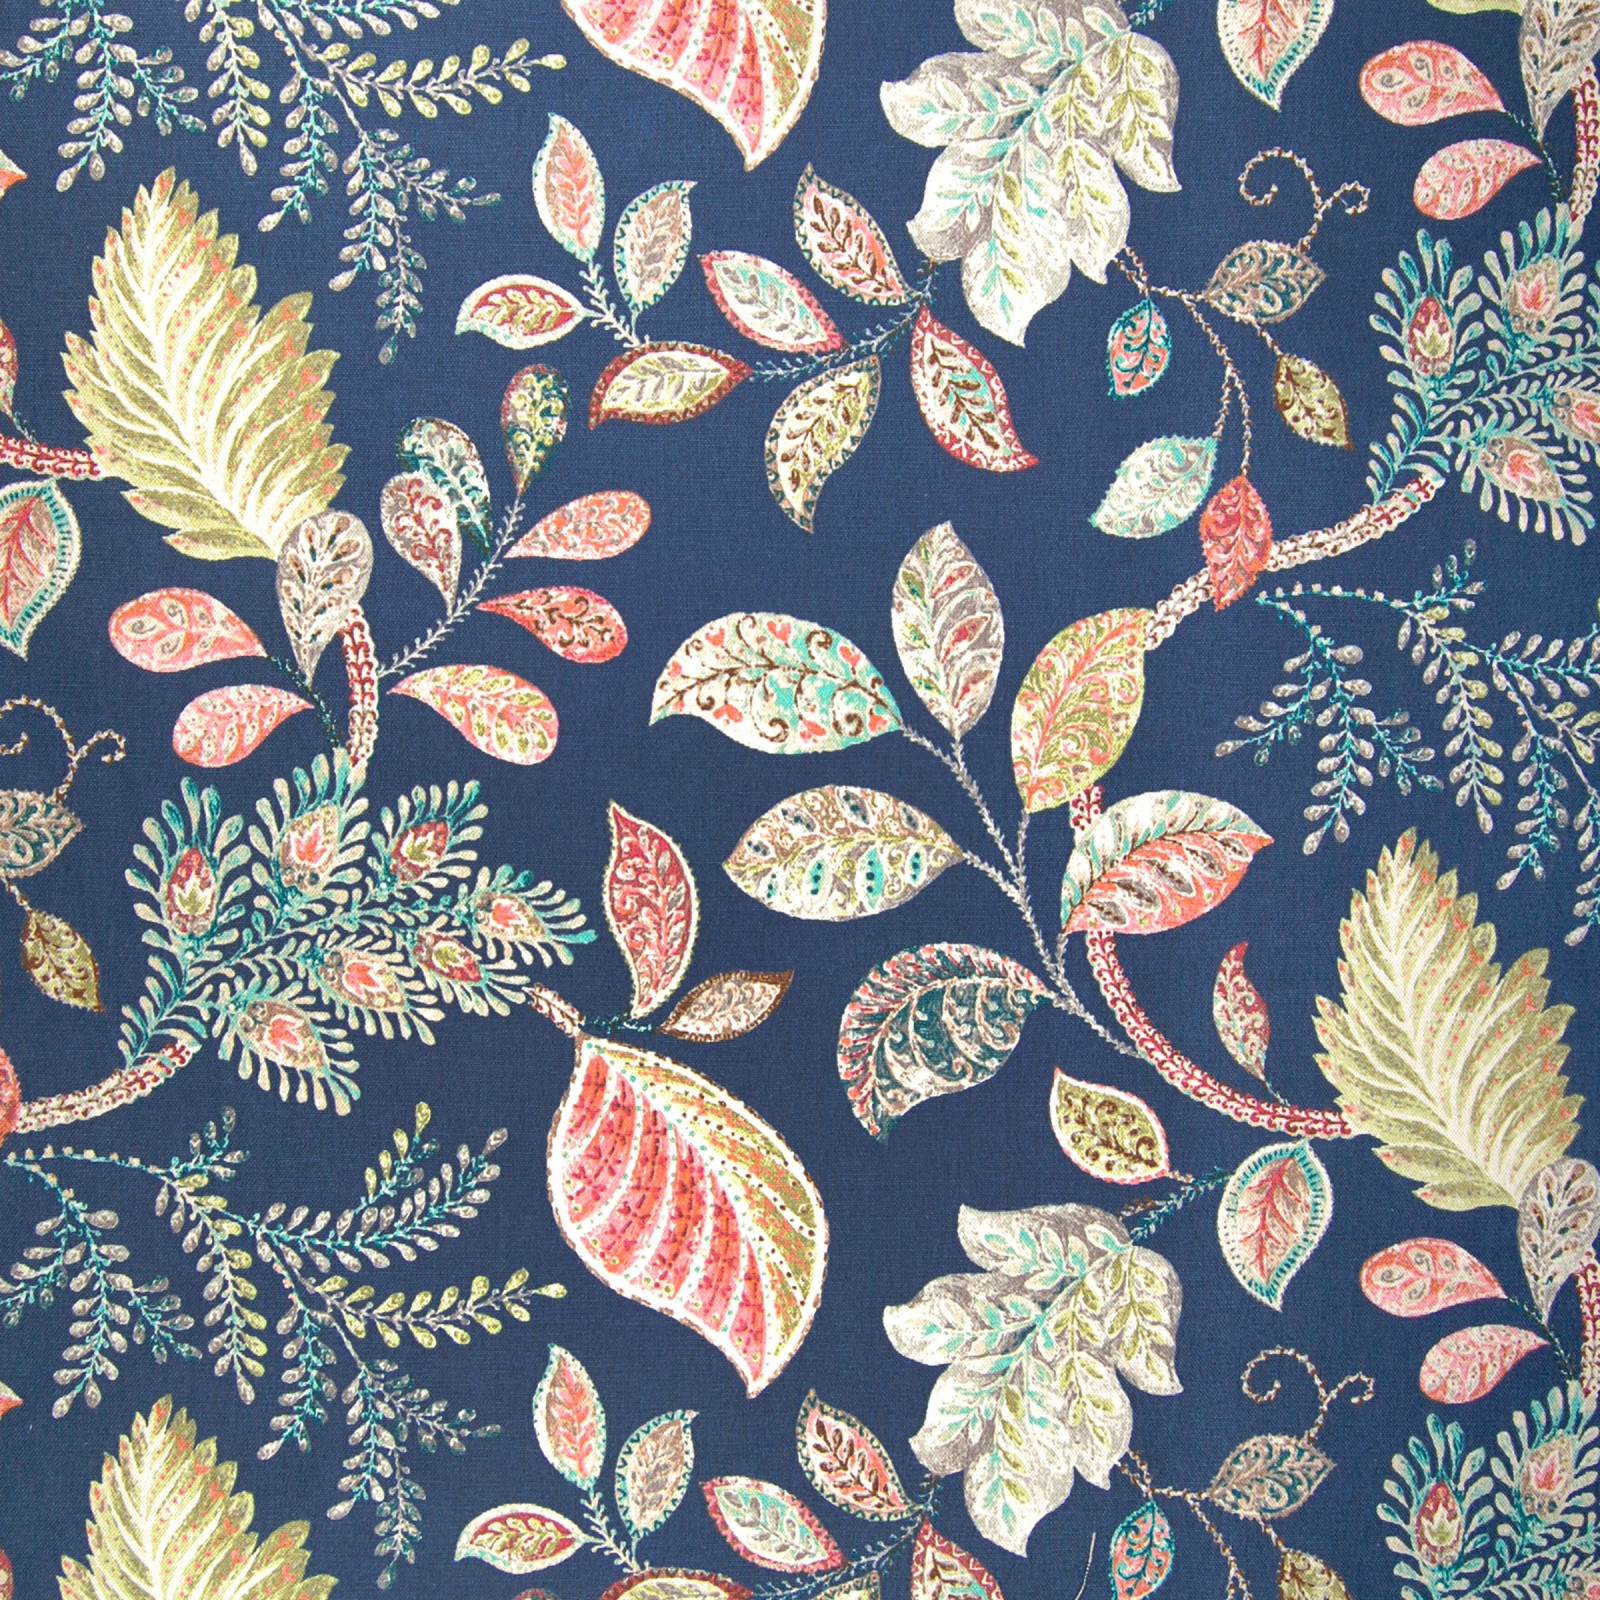 Embroidery Upholstery Fabric | Hand Embroidery